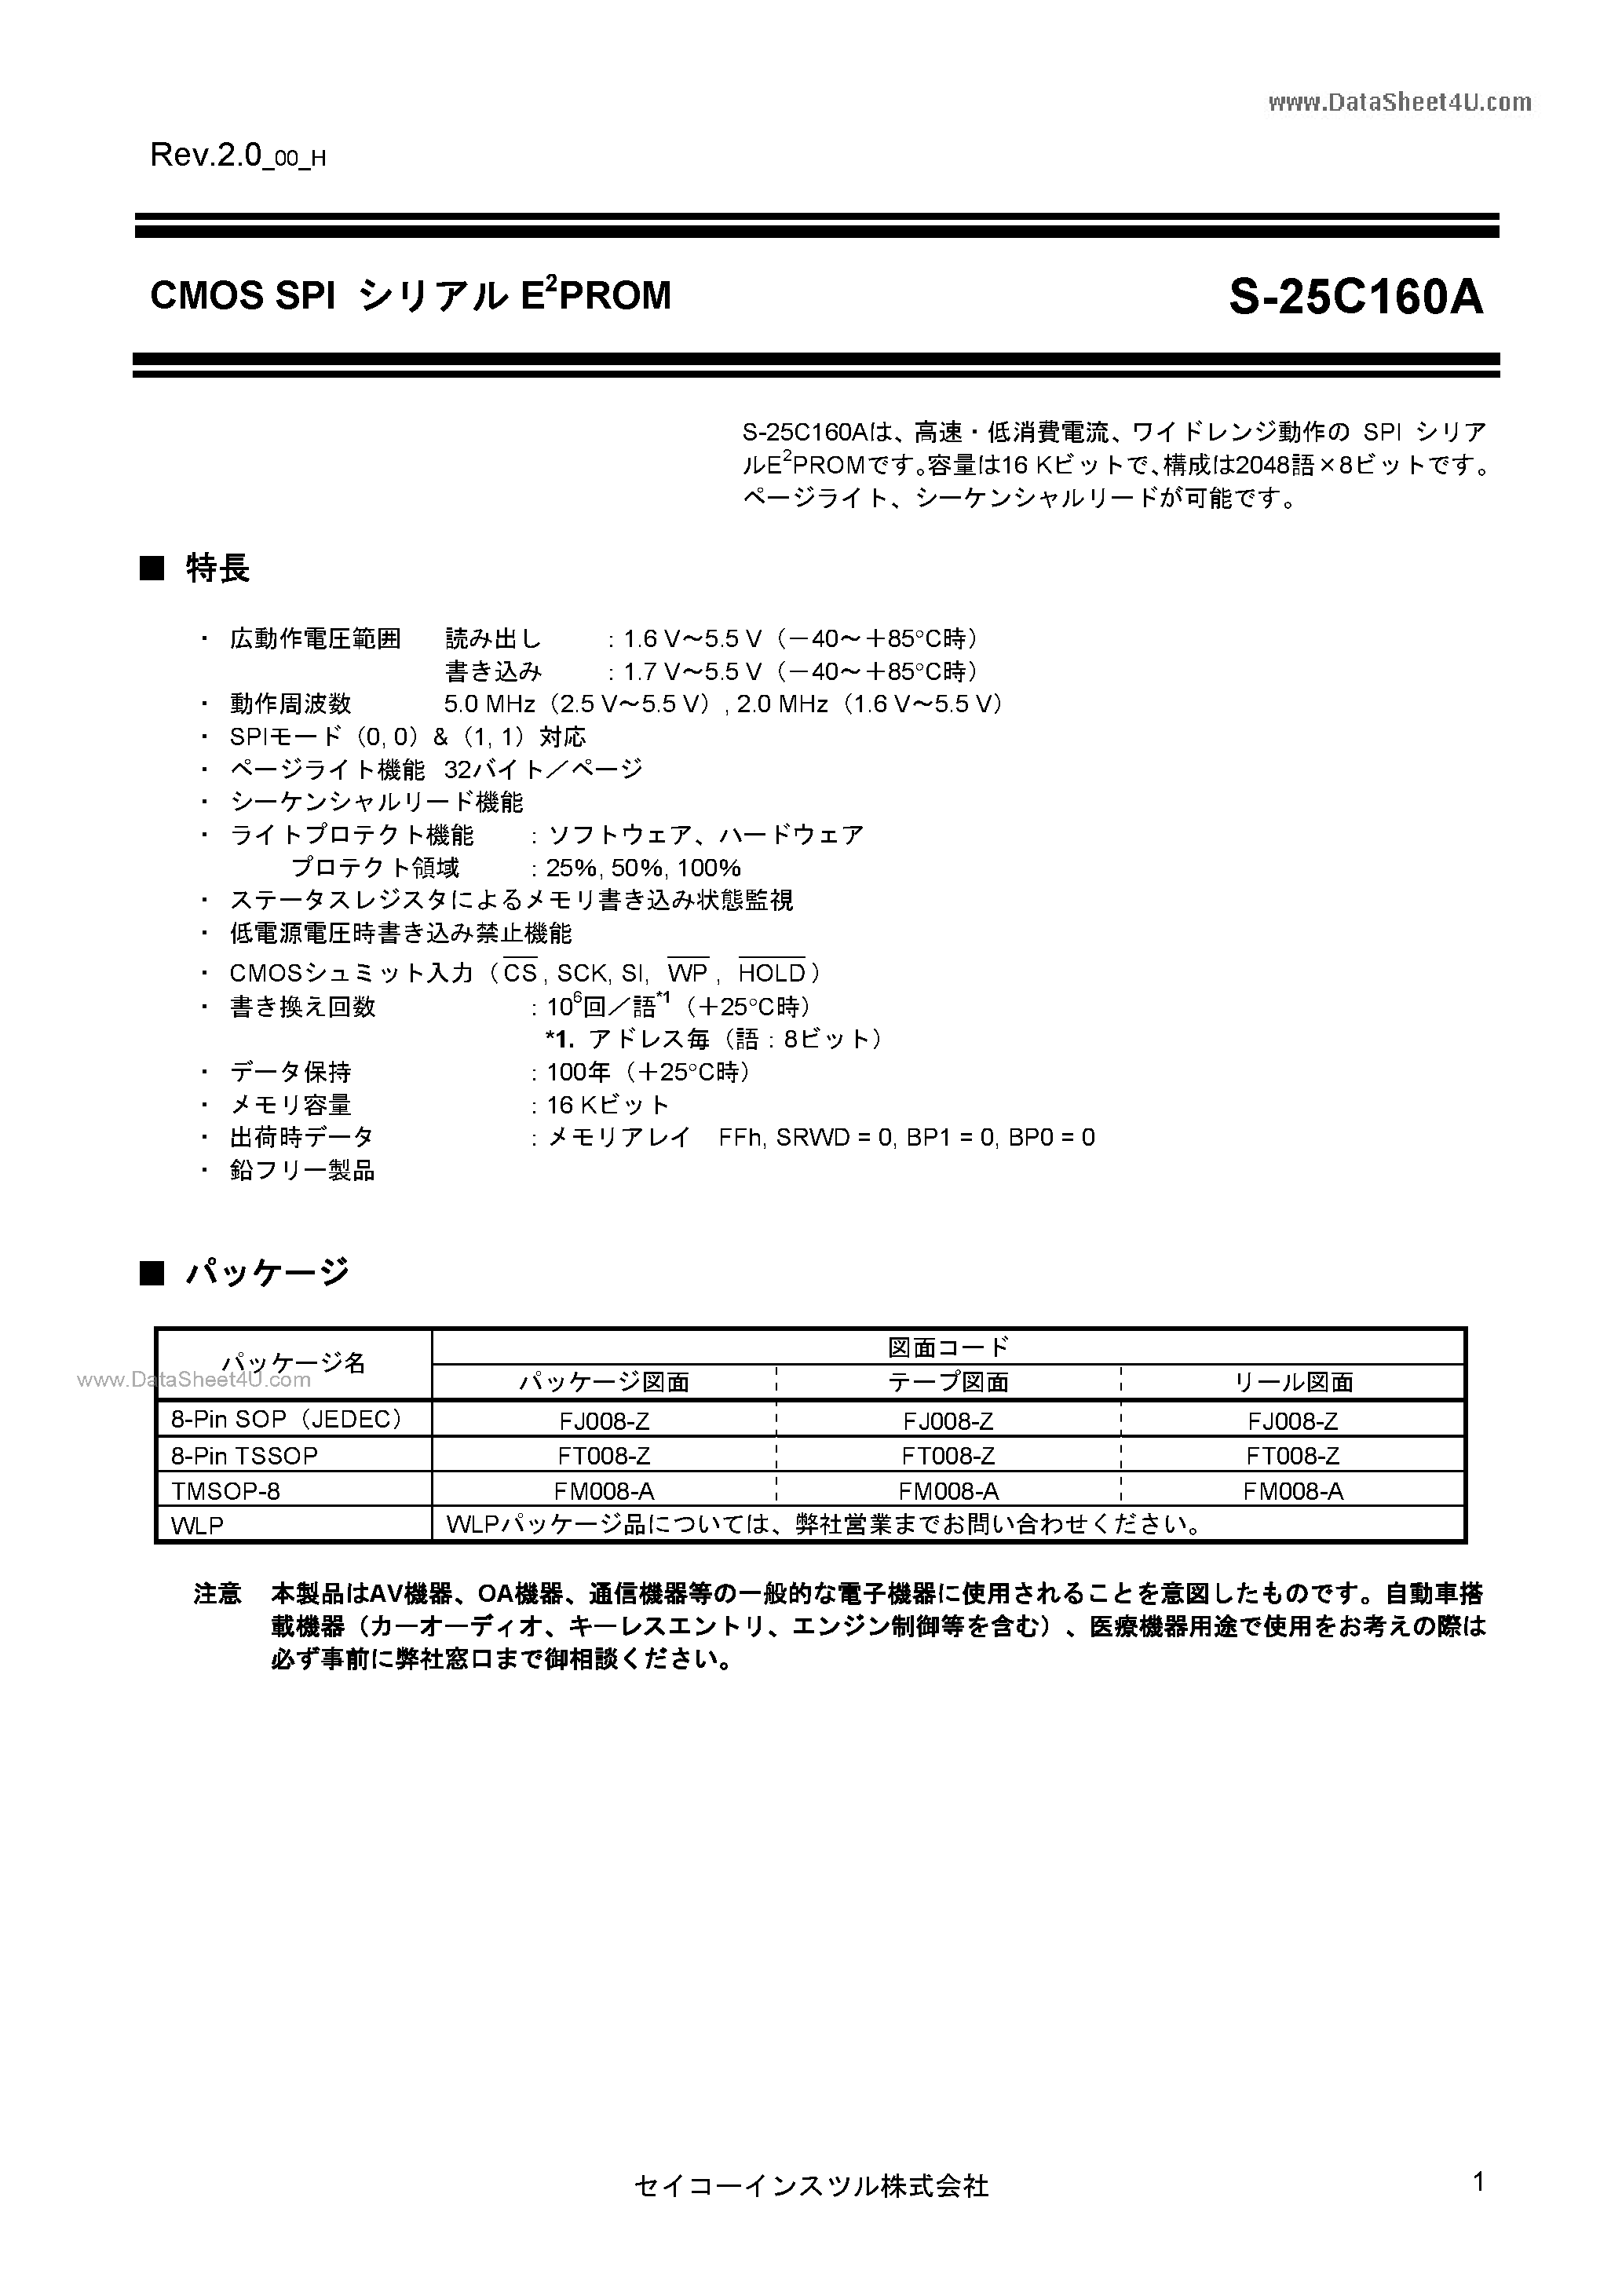 Datasheet S-25C160A - S-25C160A page 1